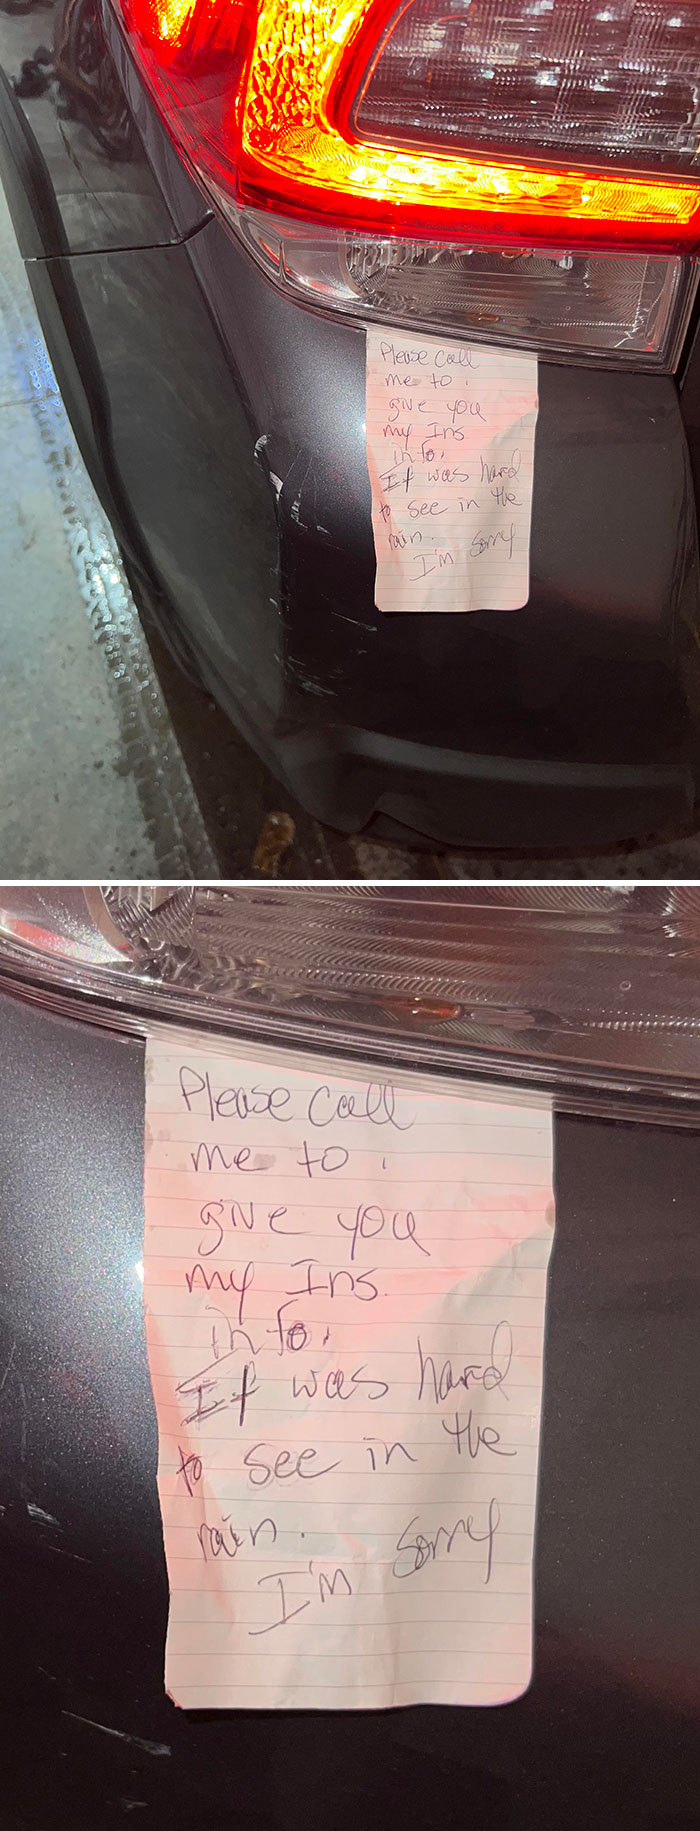 Someone Hit My Car And Left A Note With No Phone Number